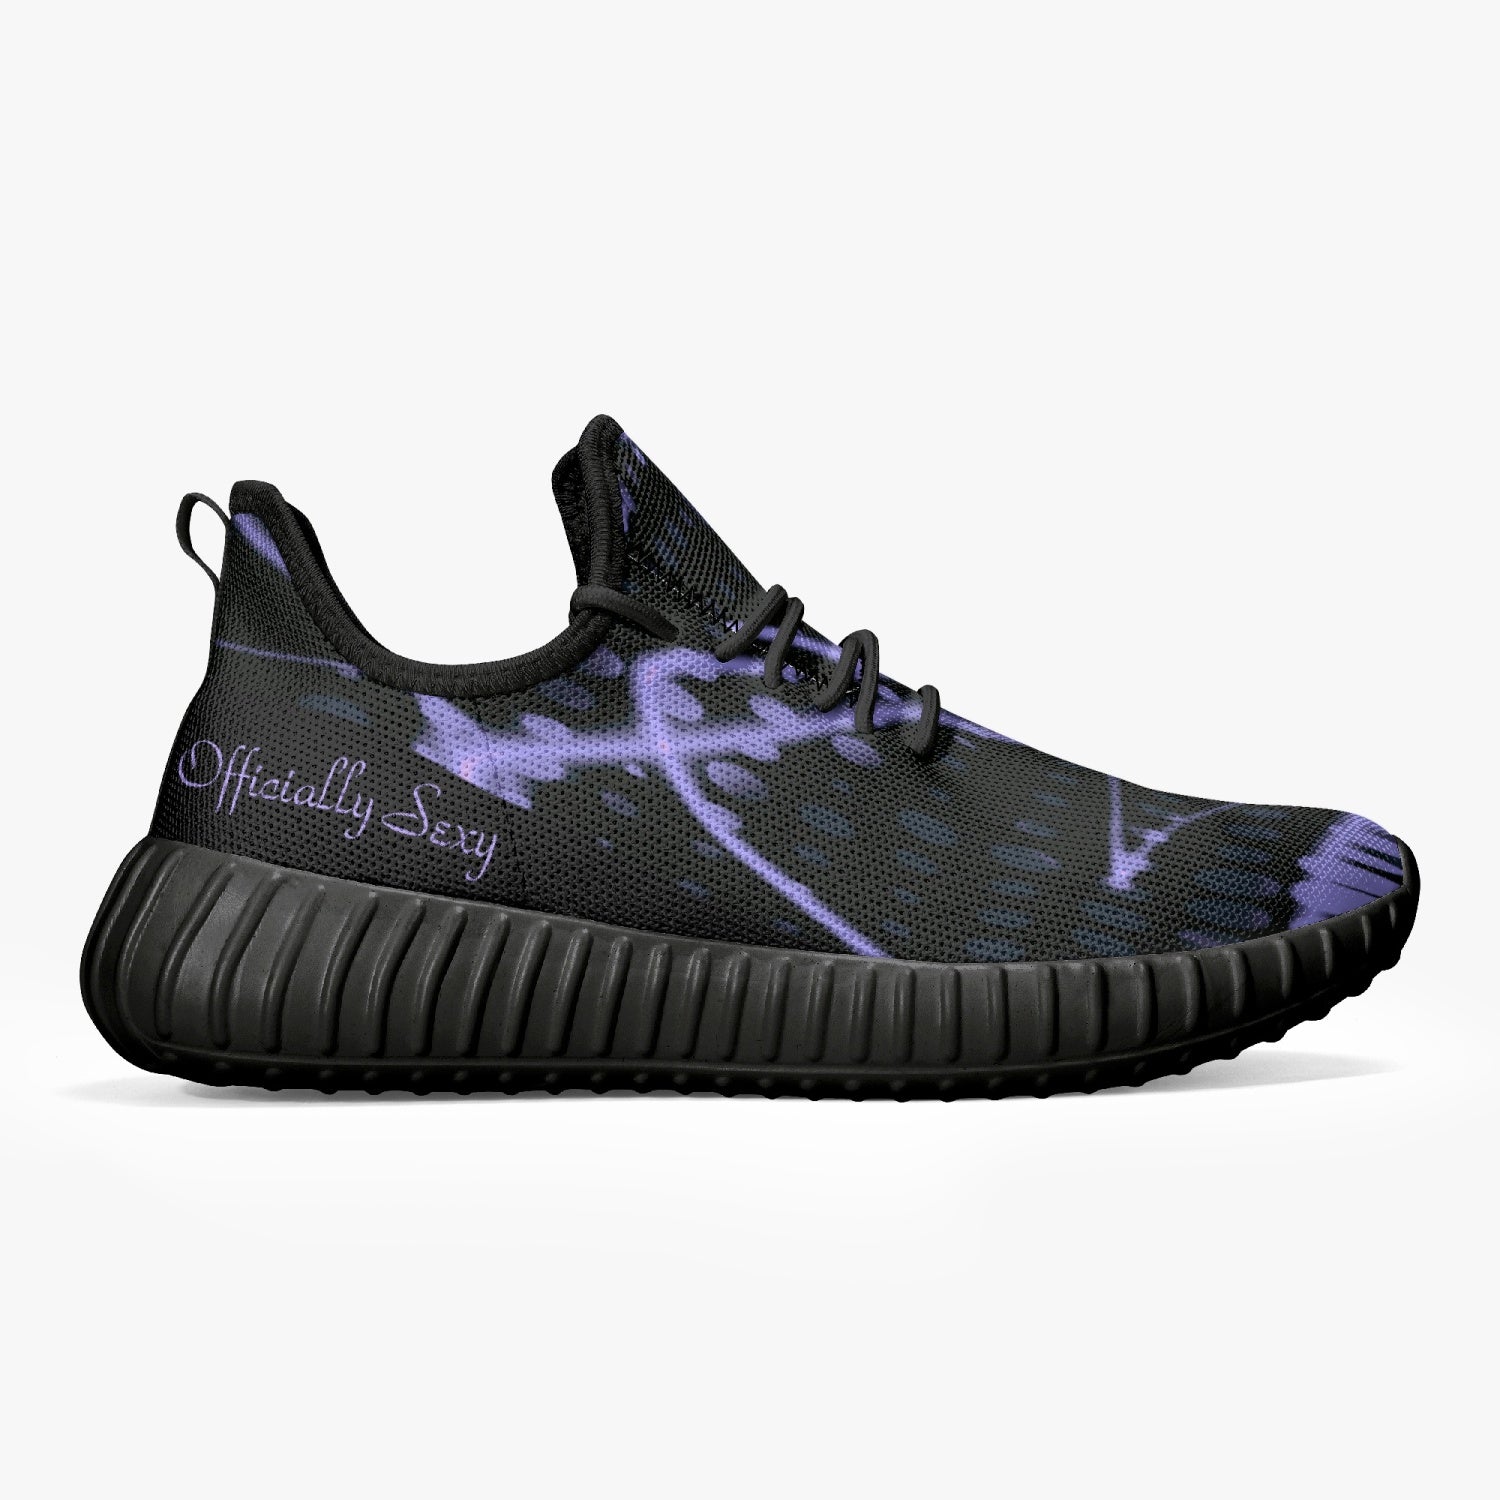 Officially Sexy Purple & Black Laser Print Mesh Knit Sneakers - With White or Black Sole